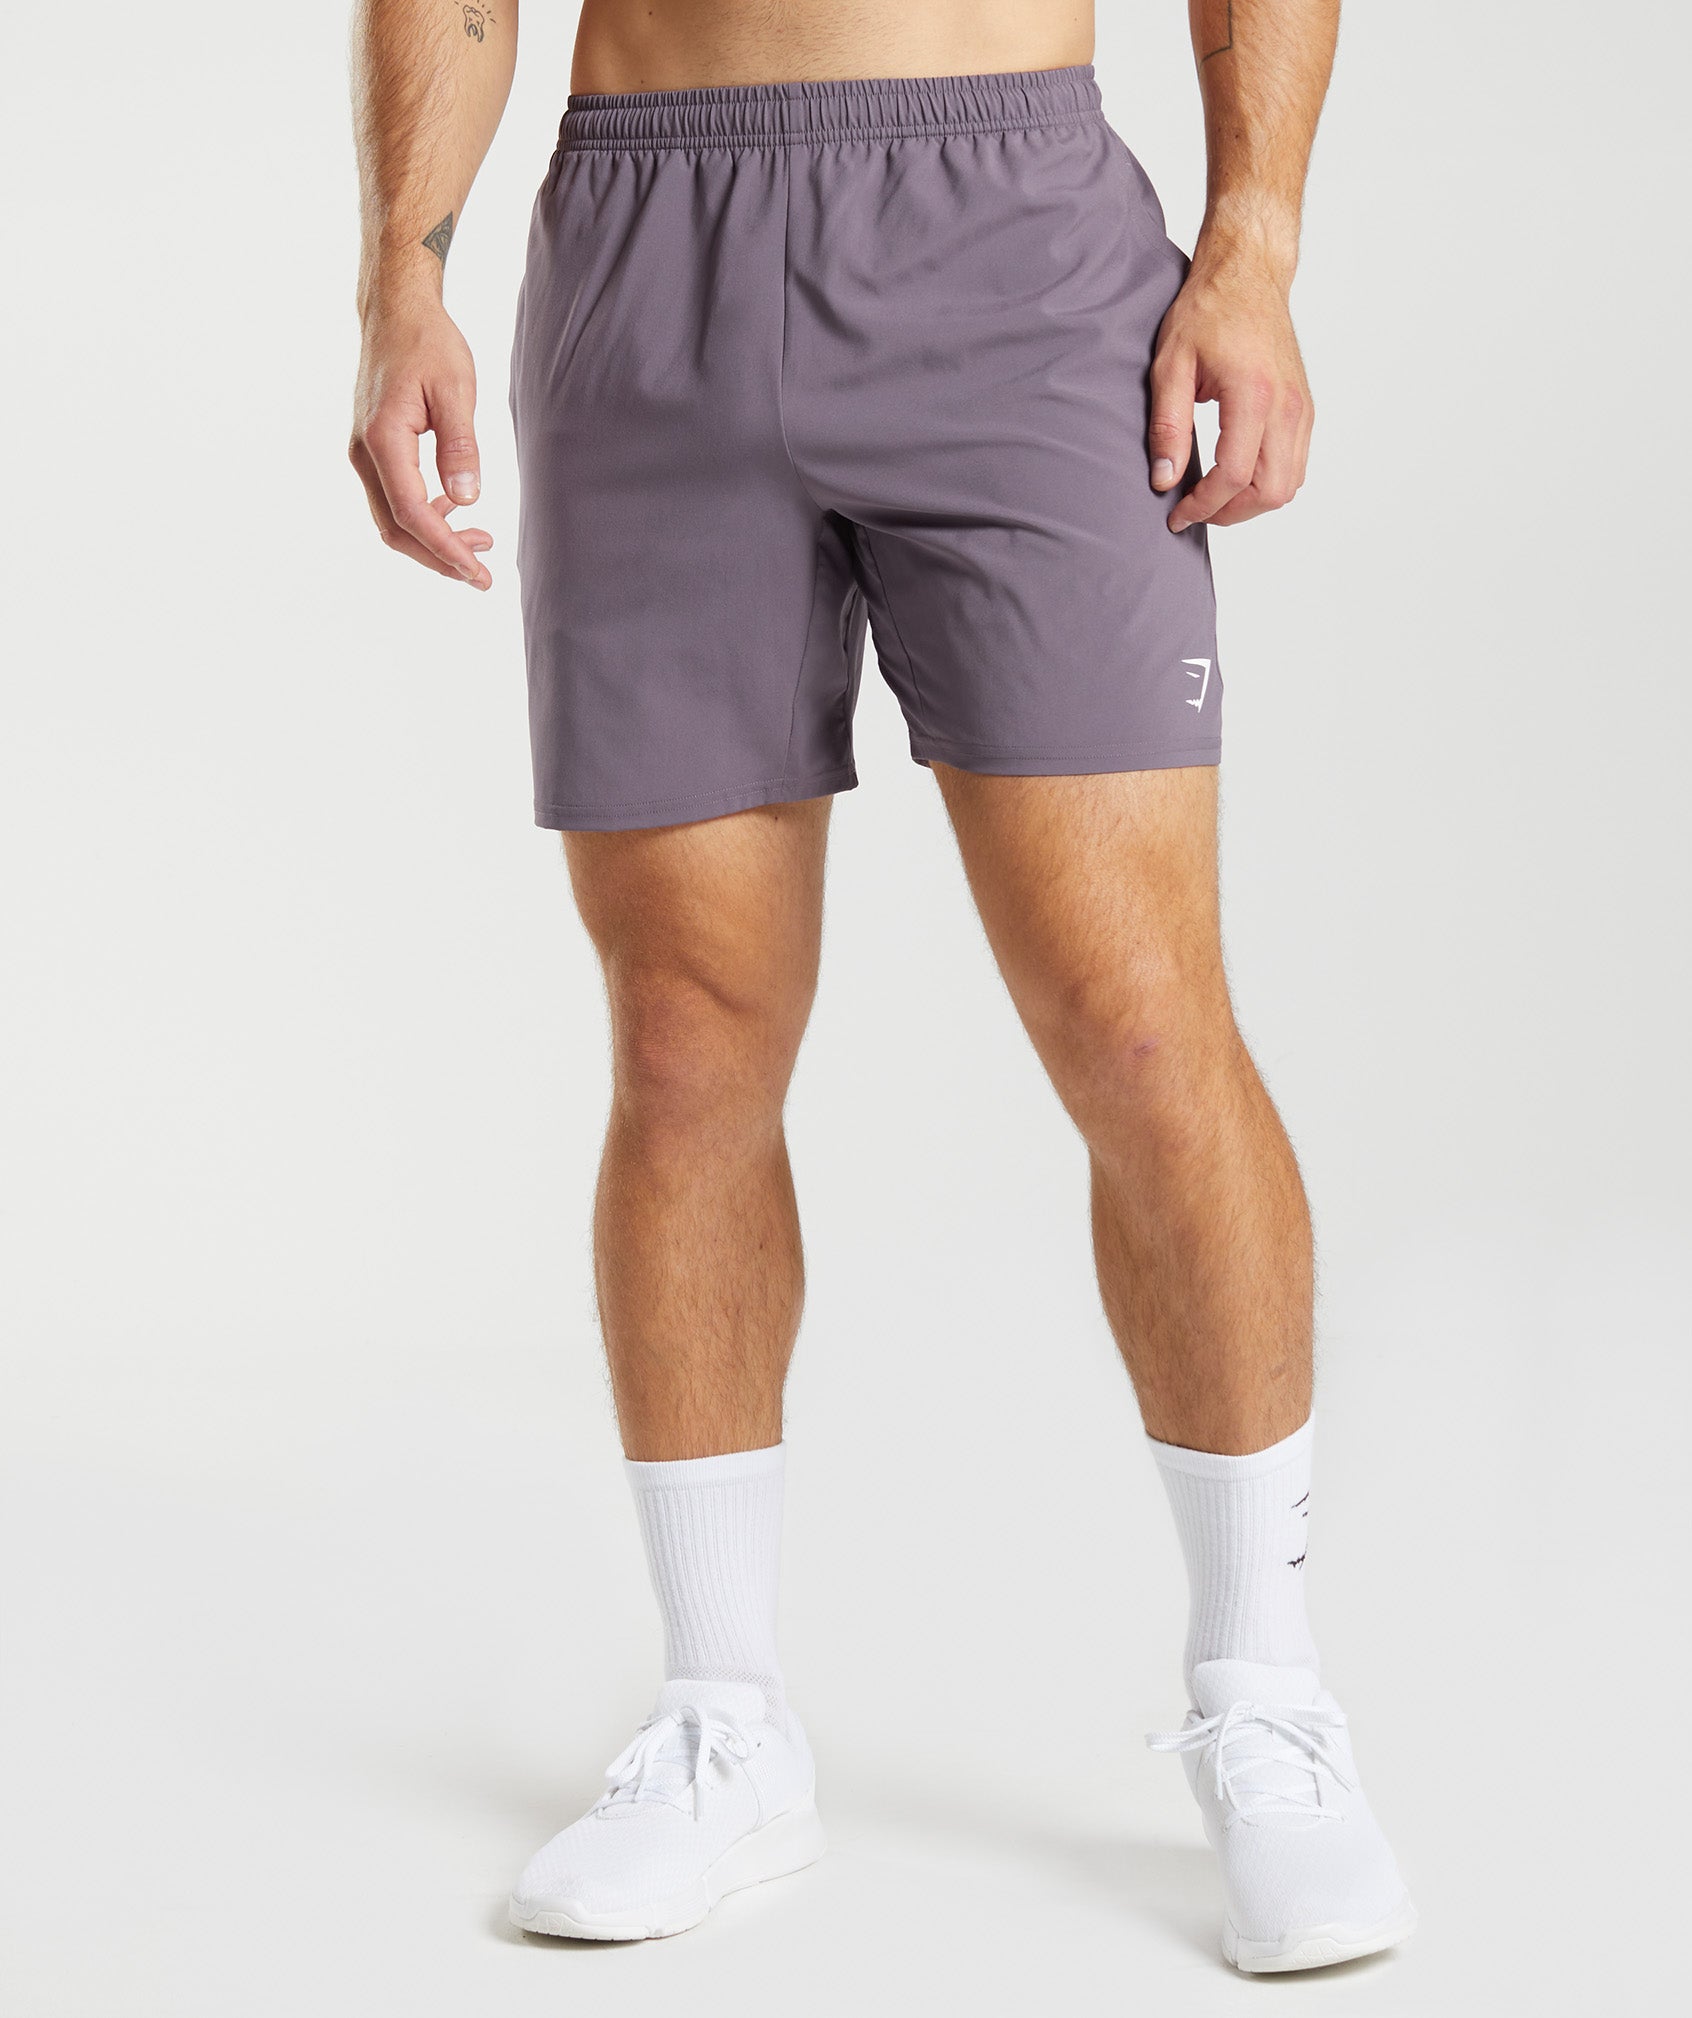 Arrival 7" Shorts in Musk Lilac - view 1